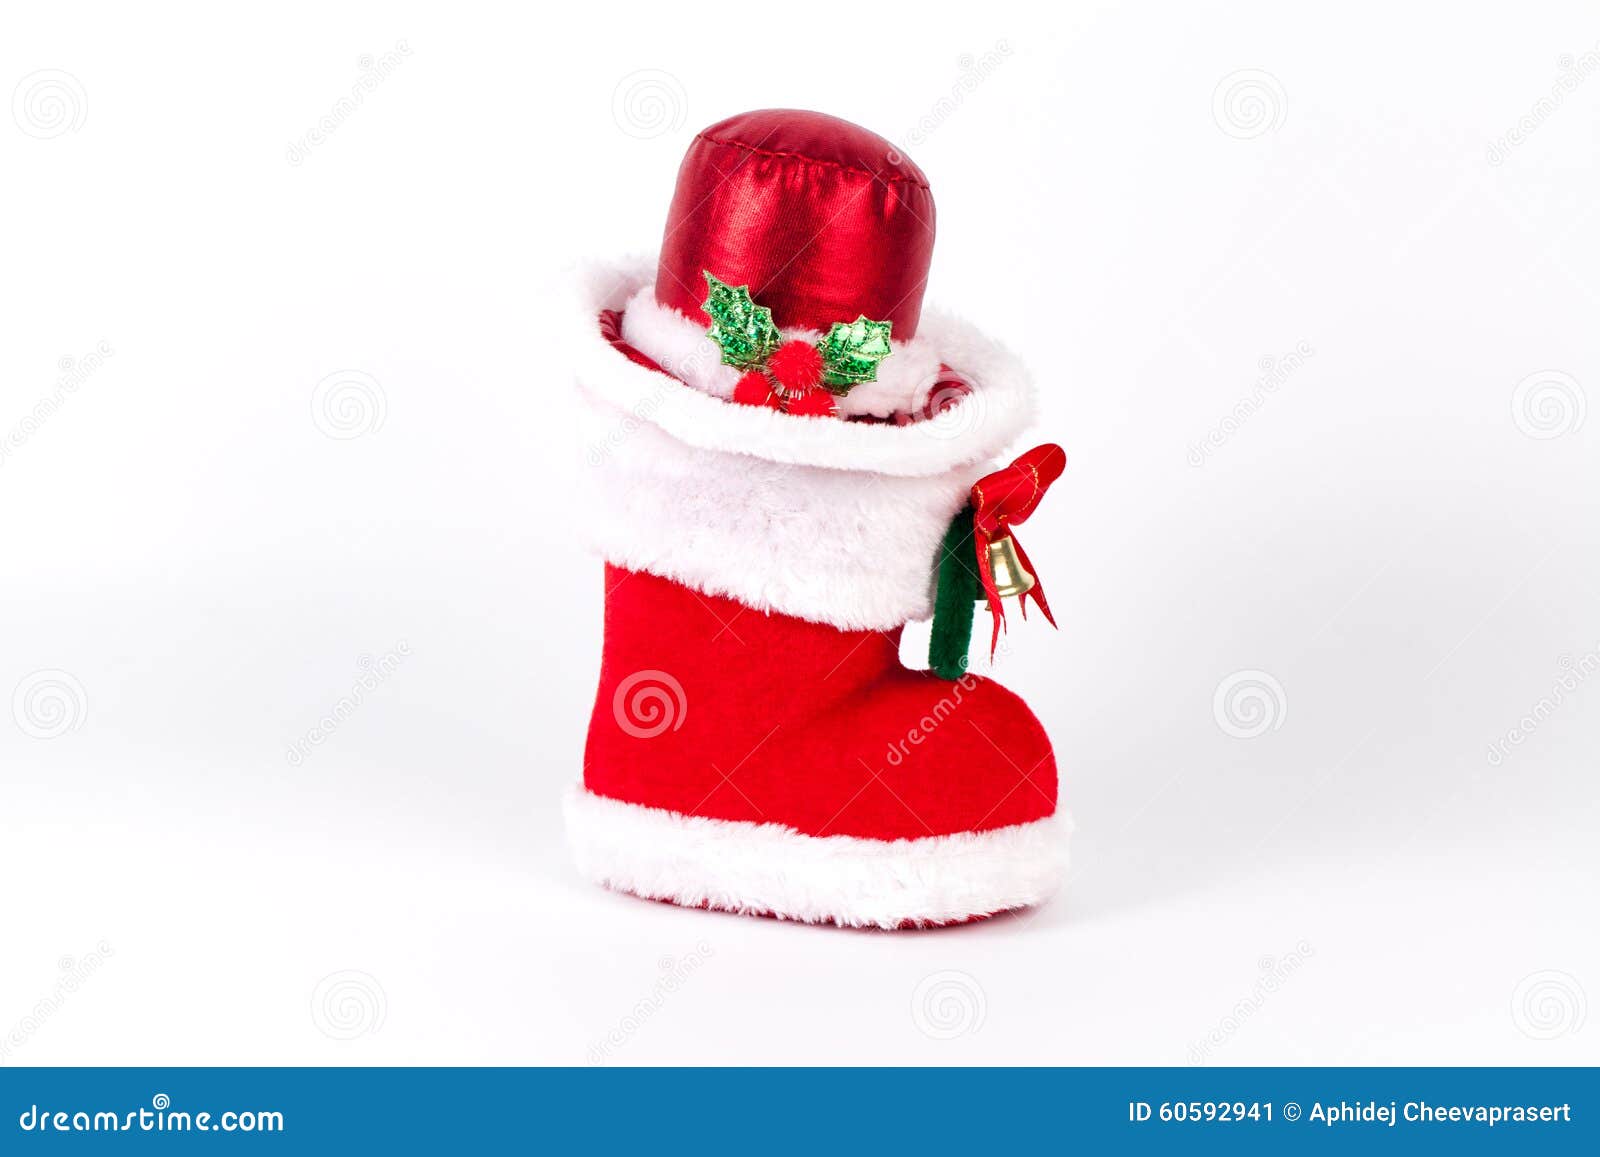 Santa S Hat on Xmas Boot. Isolated on a White Background Stock Image ...